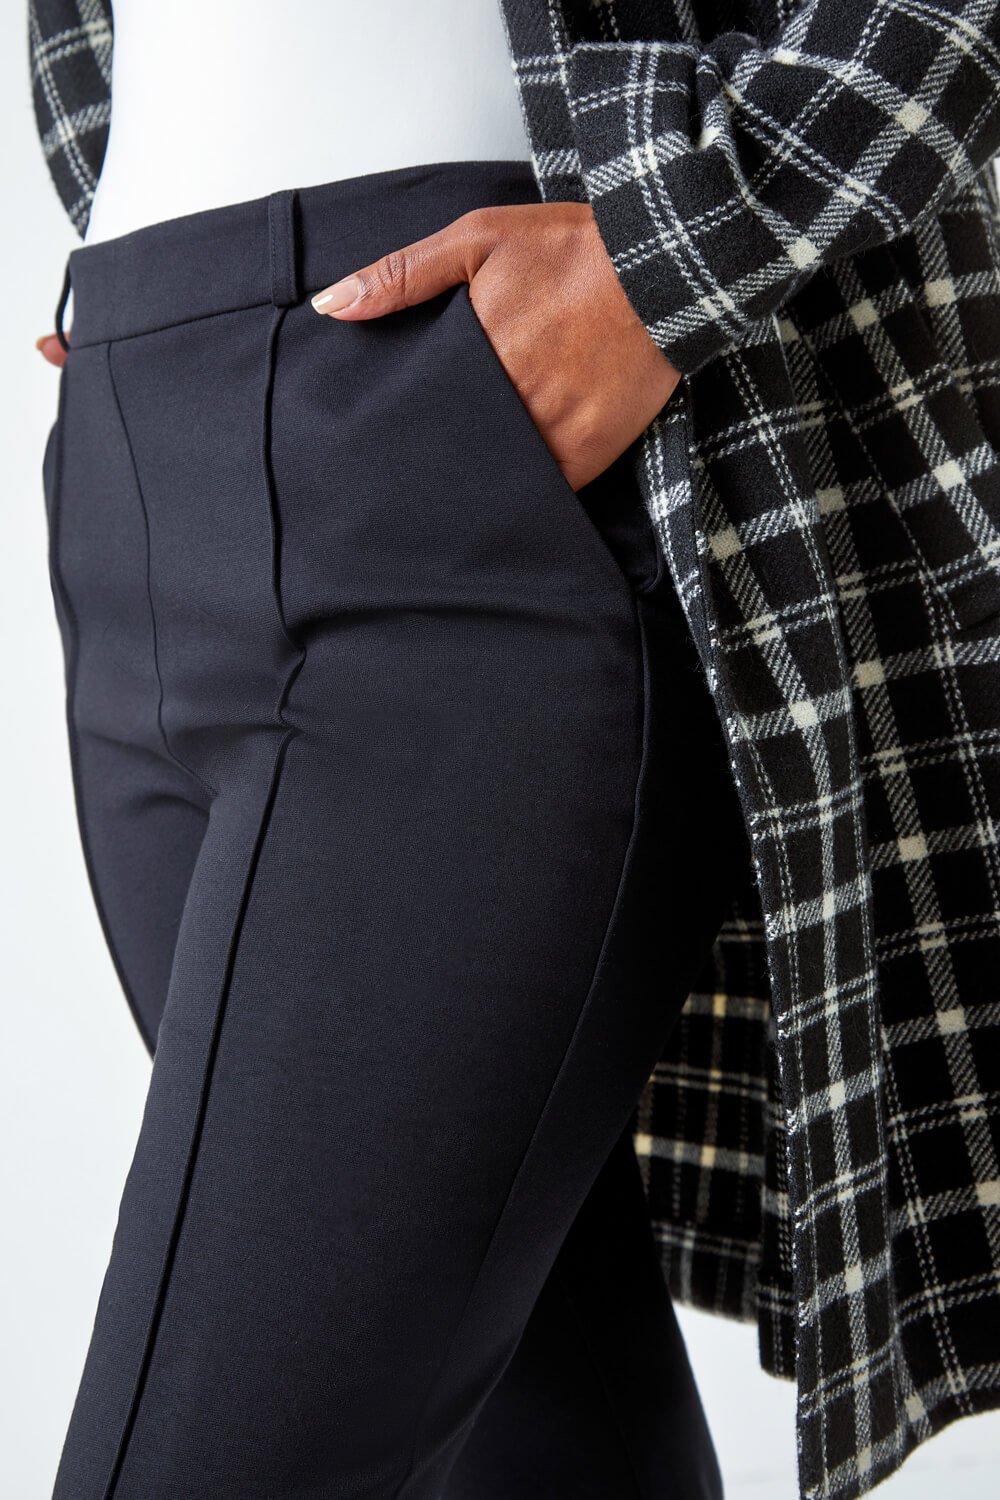 Black Petite Slim Fit Stretch Trousers, Image 5 of 5